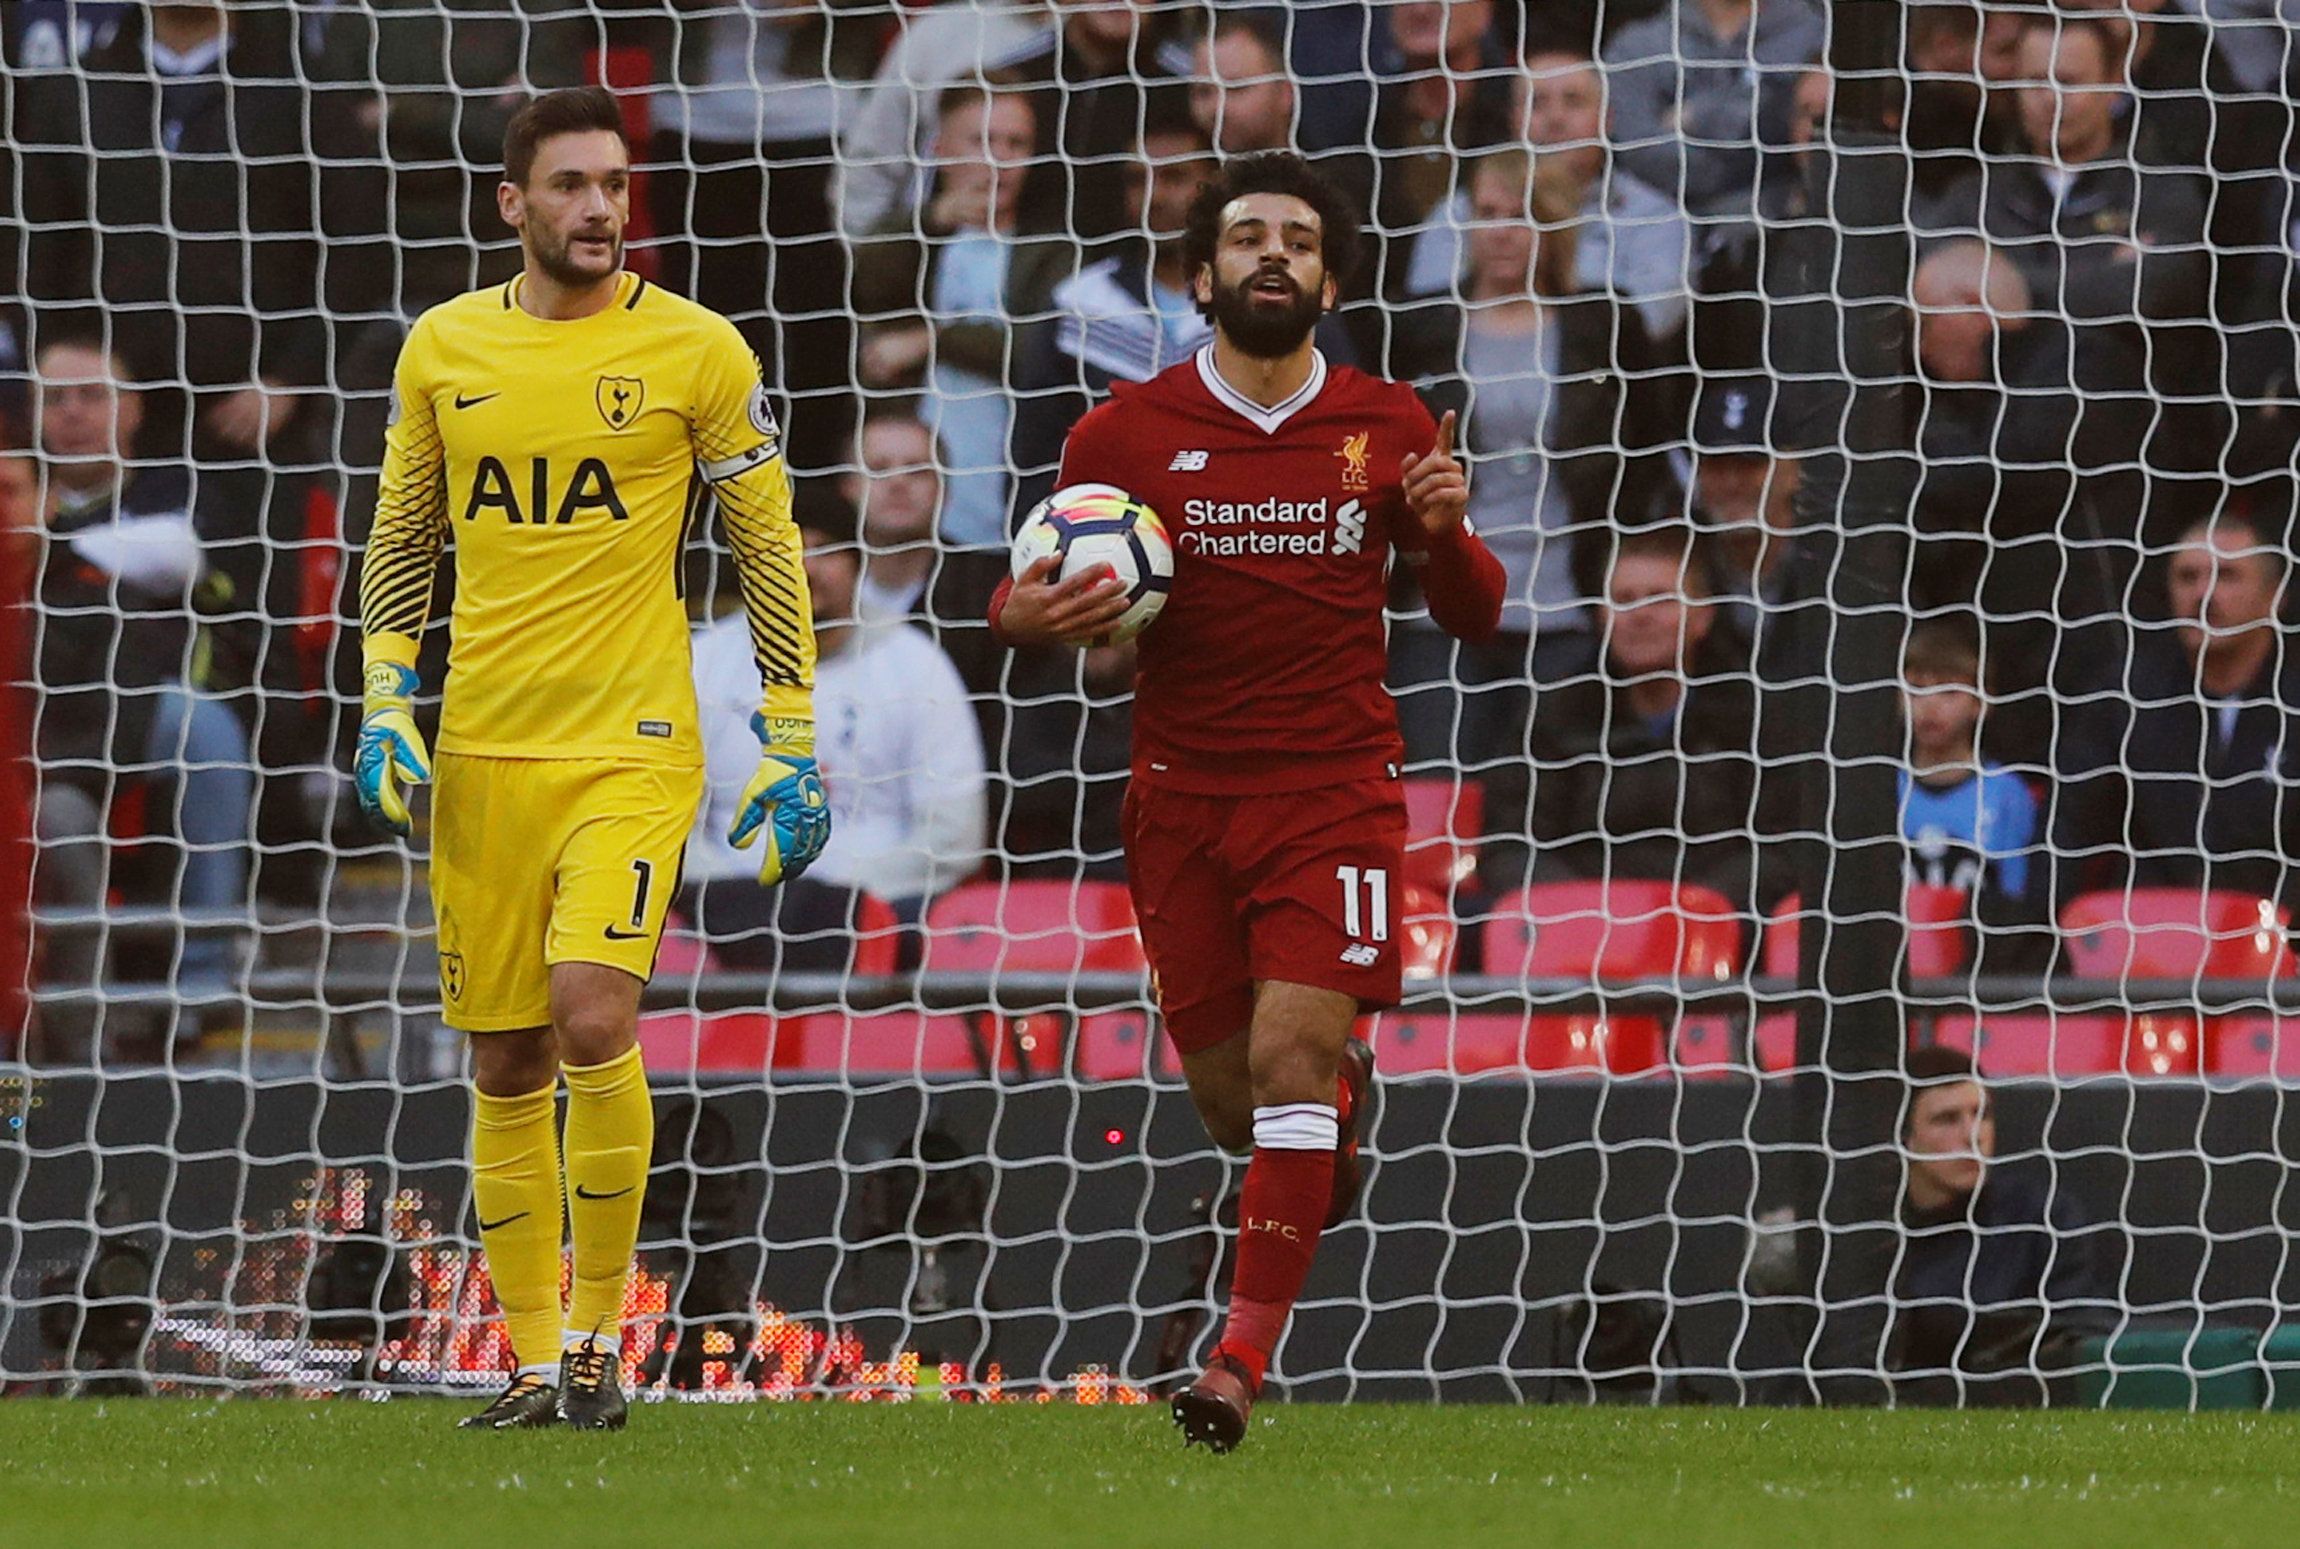 Soccer Football - Premier League - Tottenham Hotspur vs Liverpool - Wembley Stadium, London, Britain - October 22, 2017   Liverpool's Mohamed Salah celebrates scoring their first goal as Tottenham's Hugo Lloris looks on    REUTERS/Eddie Keogh    EDITORIAL USE ONLY. No use with unauthorized audio, video, data, fixture lists, club/league logos or 